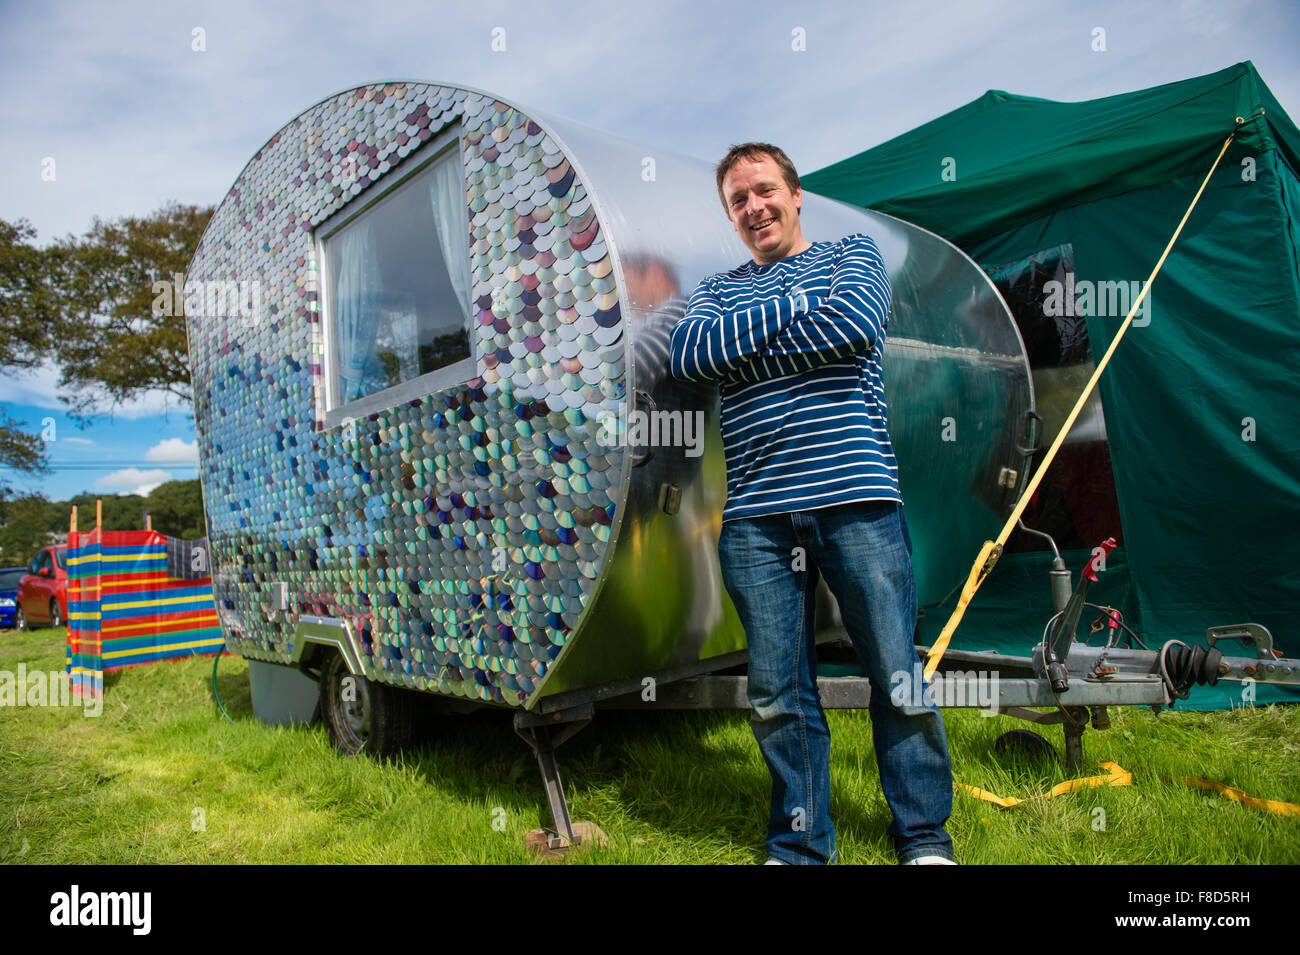 Craftsman and maker Carwyn Lloyd Jones, standing outside  his small wooden-framed caravan which he made himself from salvaged scrap  timber and covered on the outside with recycled compact discs, Aberystwyth Wales UK Stock Photo